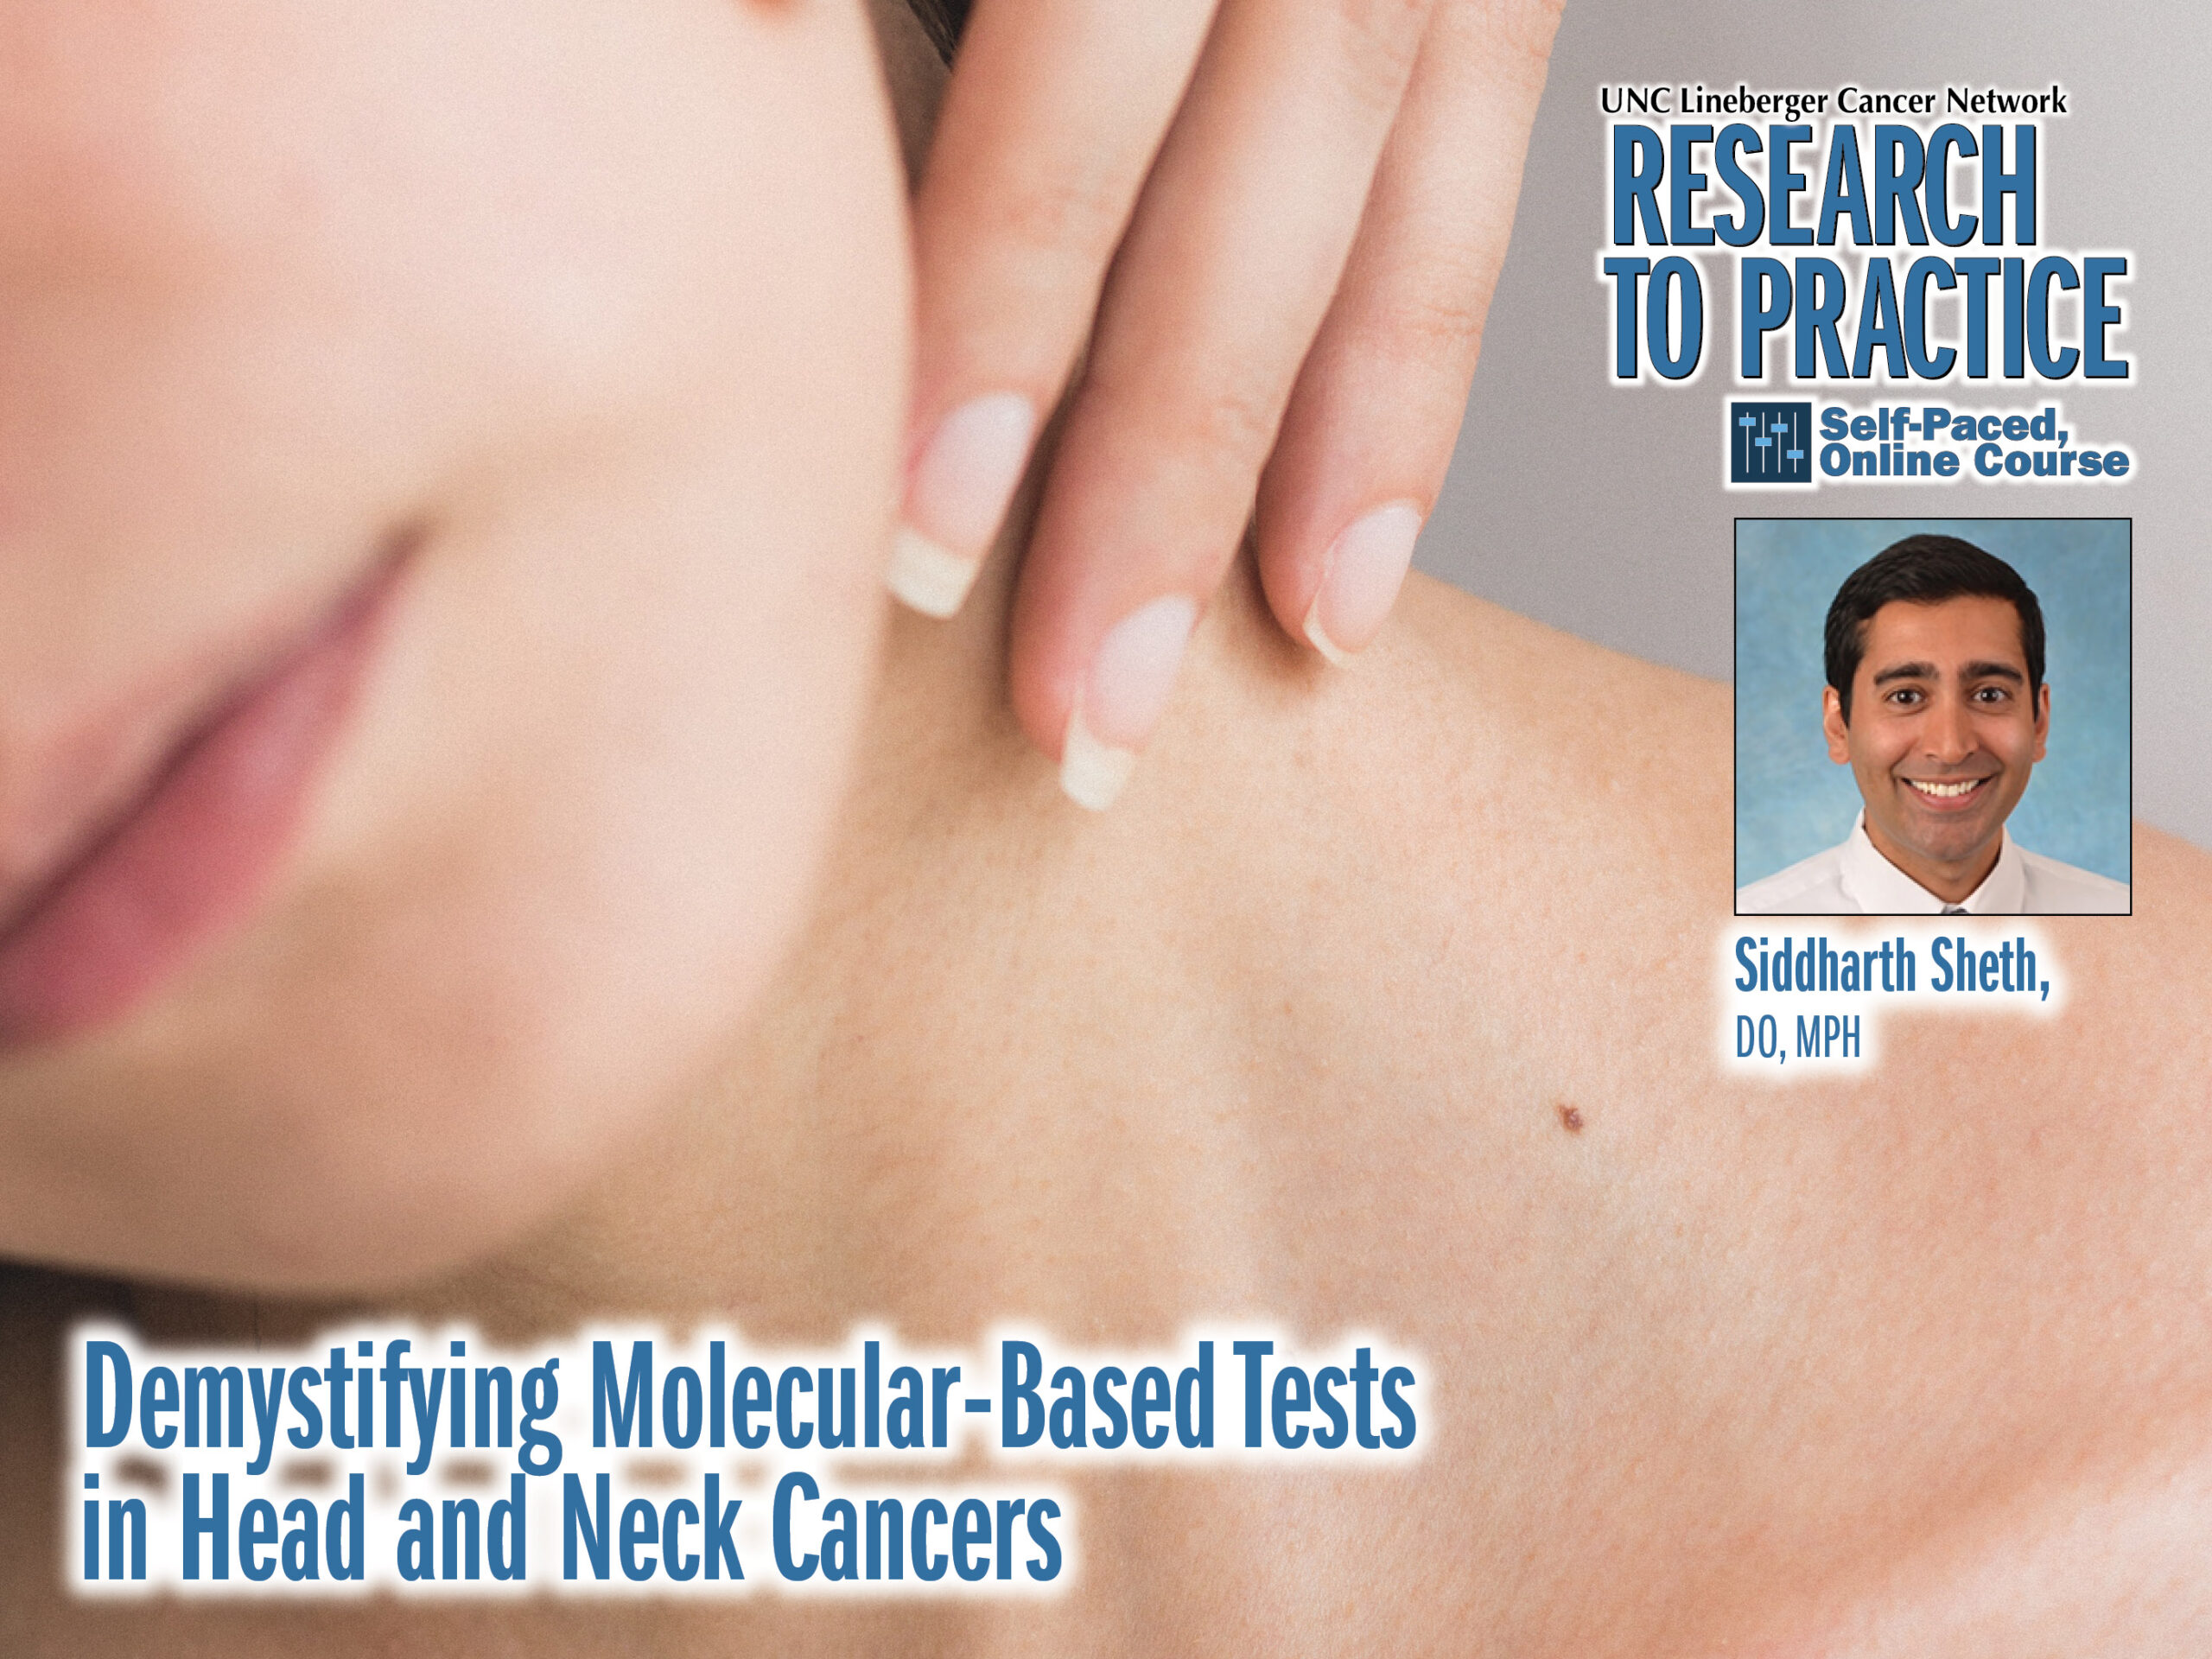 Demystifying Molecular-Based Tests in Head and Neck Cancers